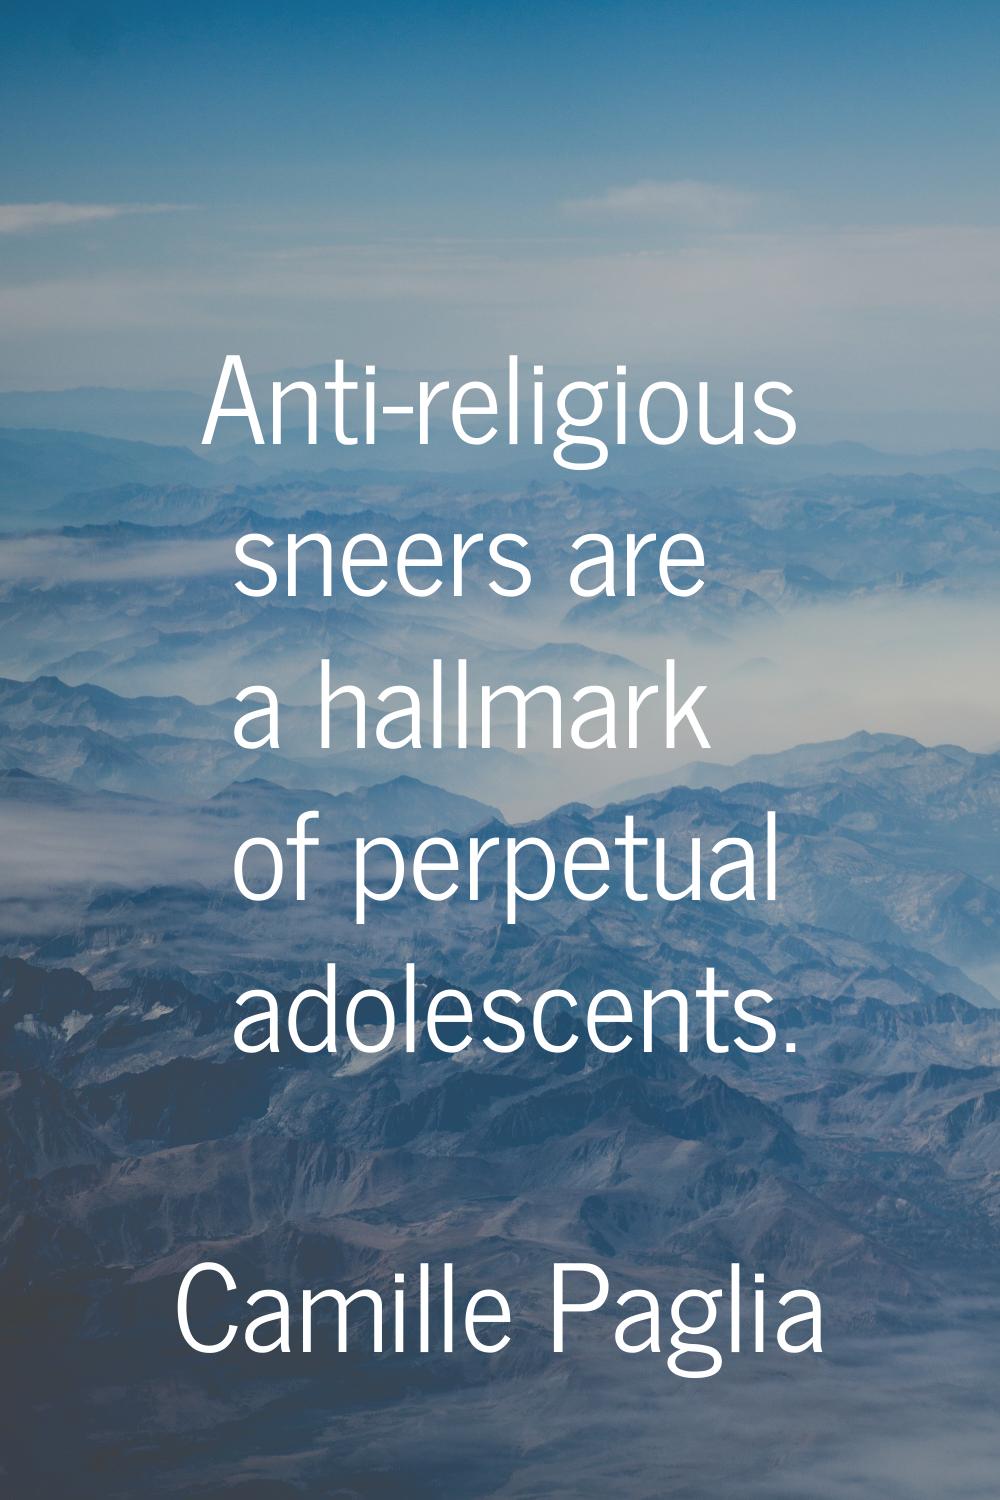 Anti-religious sneers are a hallmark of perpetual adolescents.